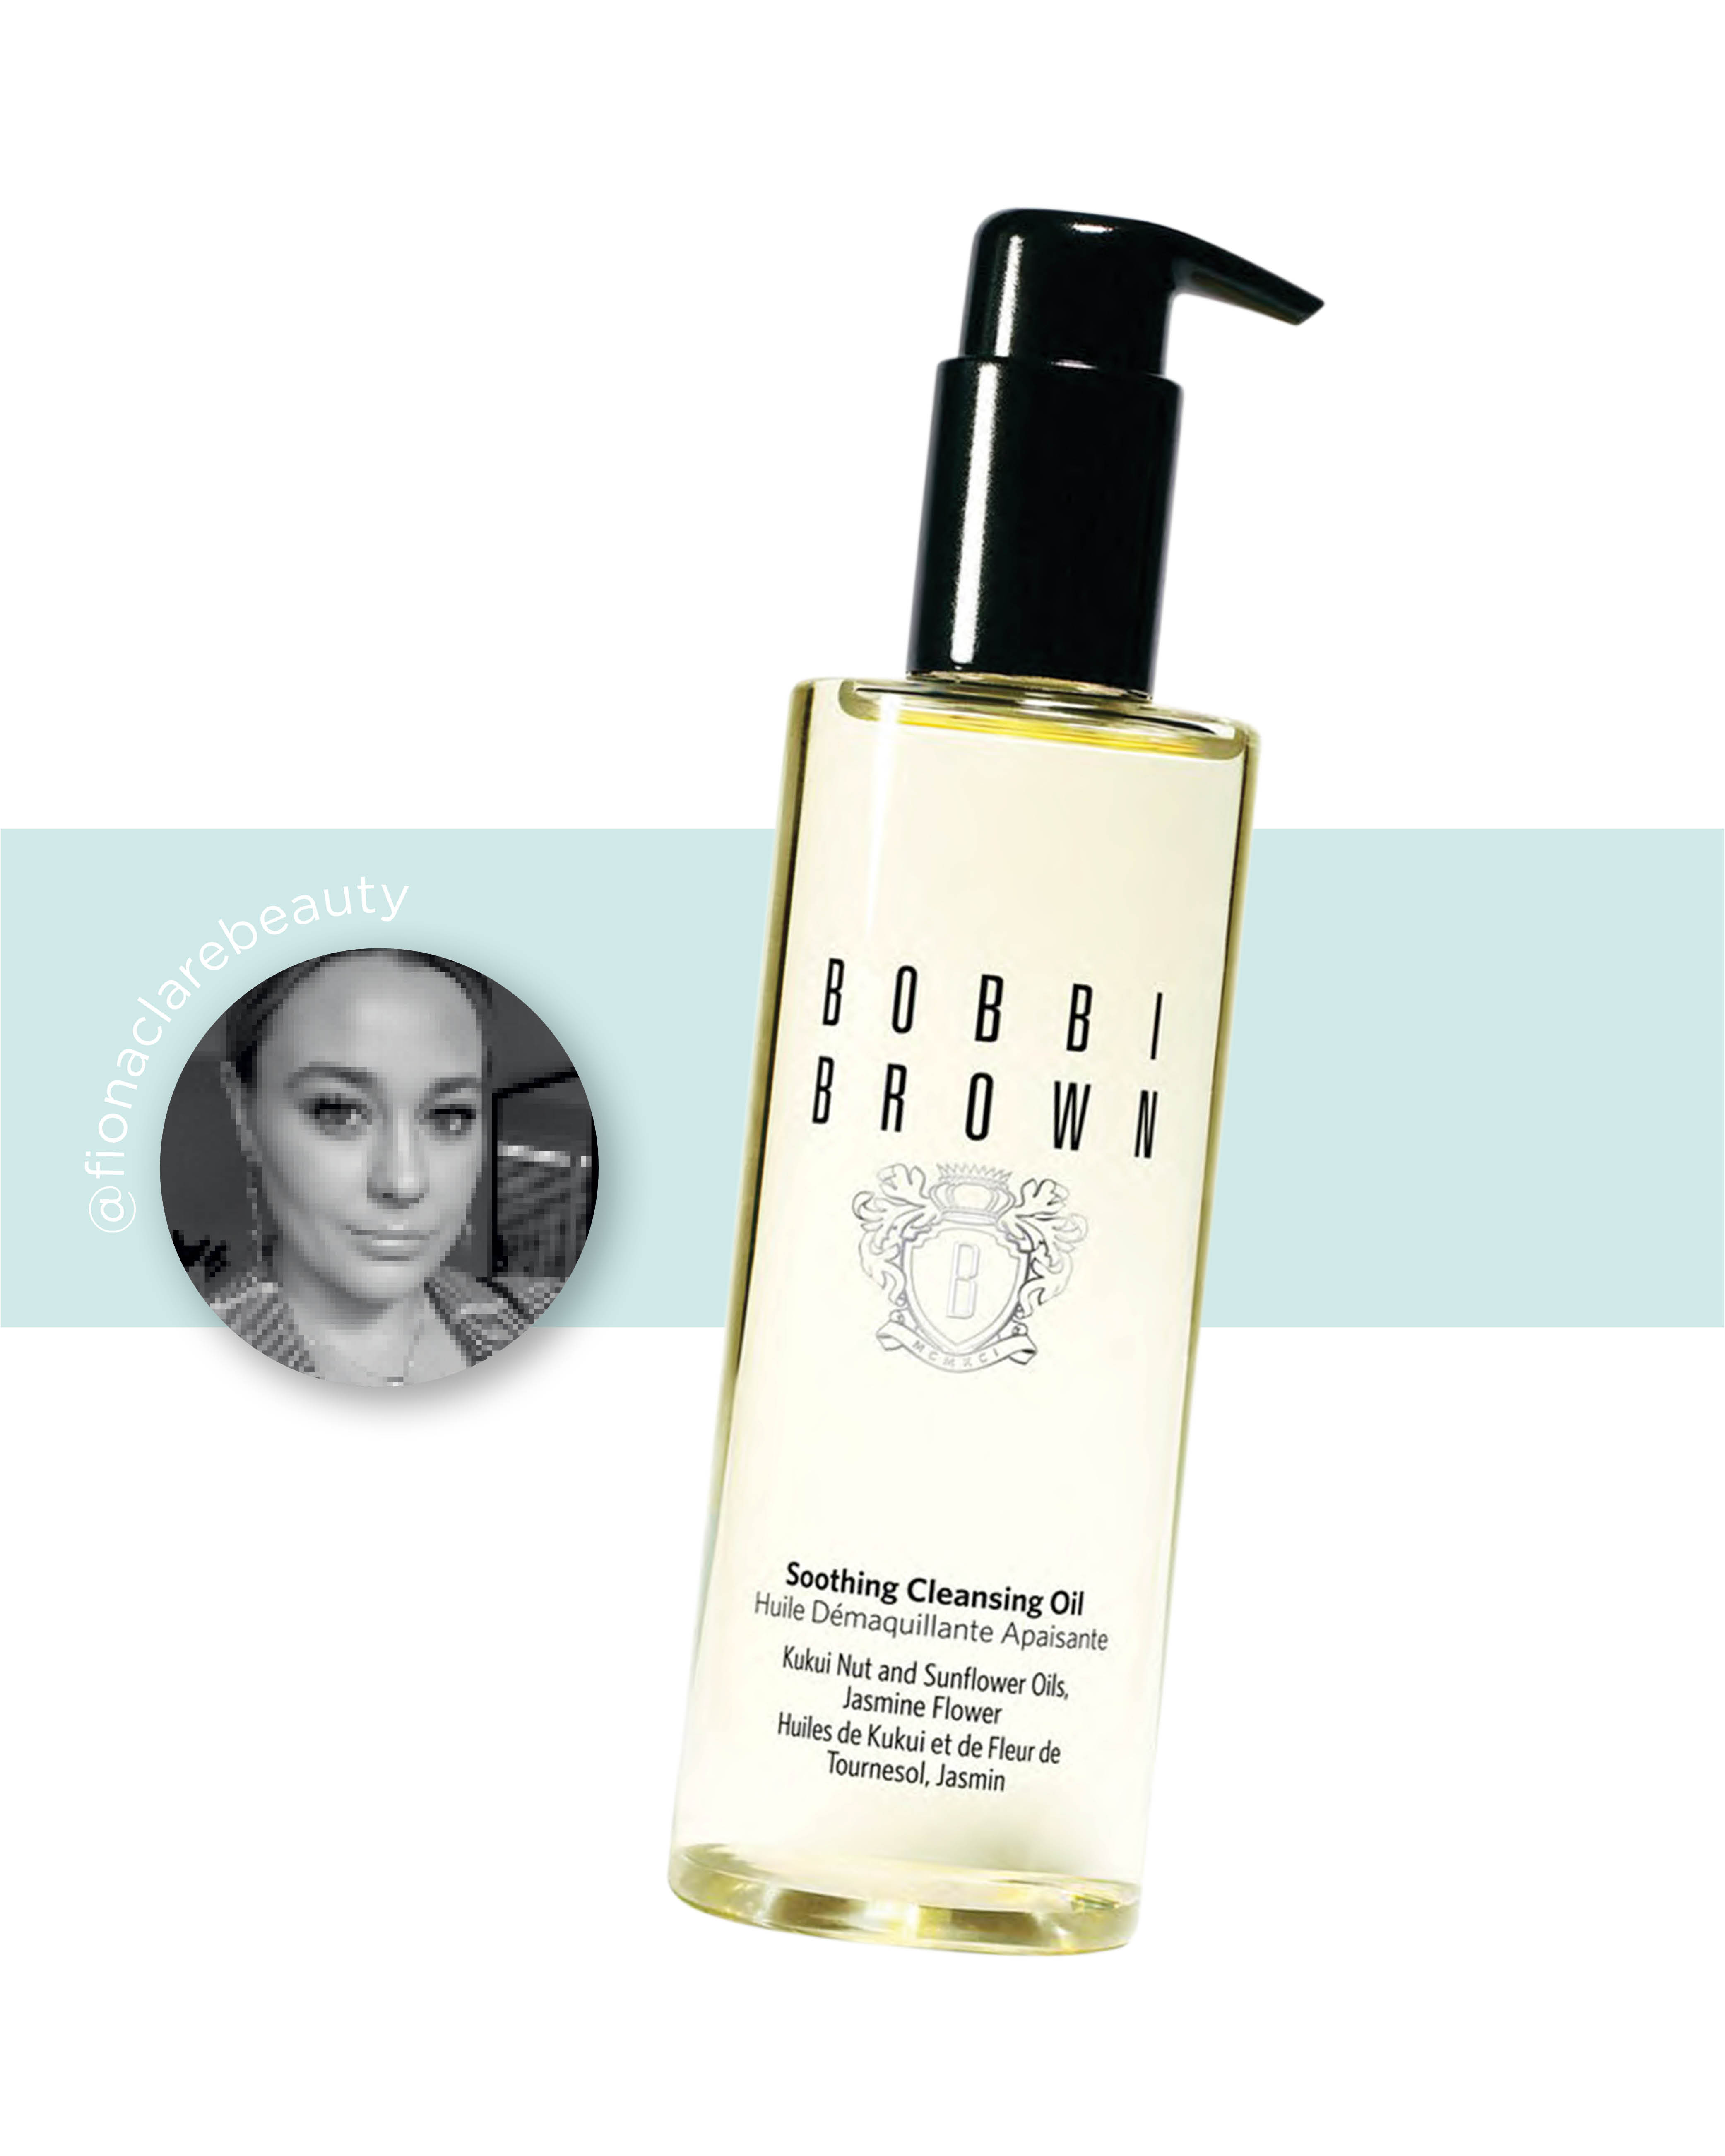 Bobbi Brown Soothing Cleansing Oil, $85. I love how quickly it removes really long-wearing makeup. It leaves skin feeling hydrated and soft rather than stripped, like a foaming cleanser can do.